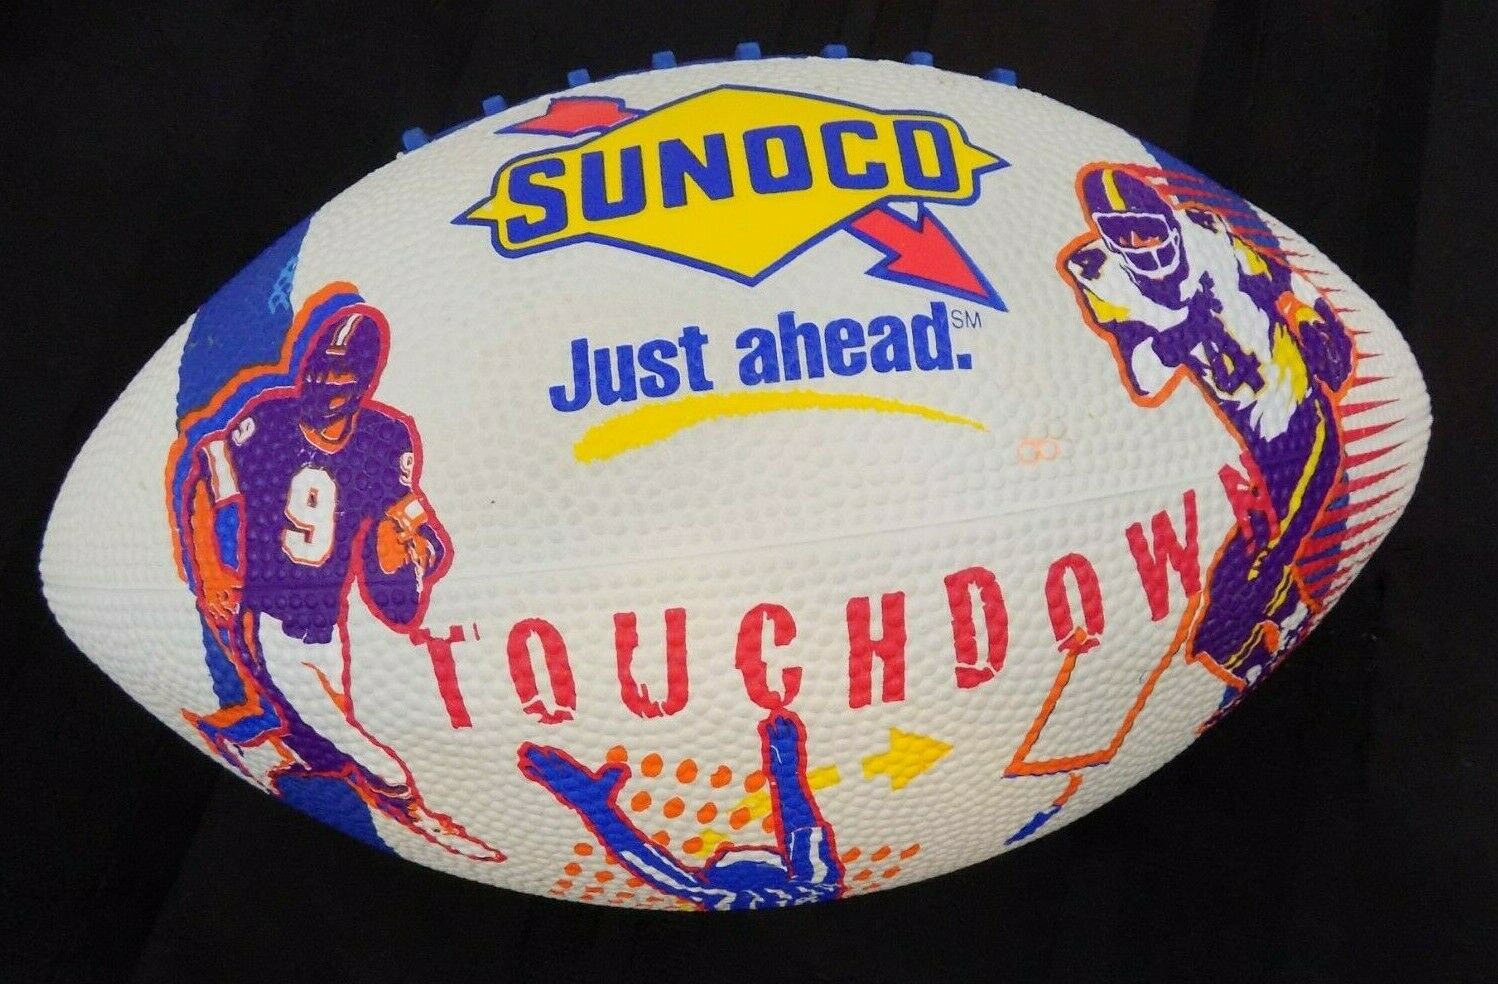 Promotional Sunoco "just Ahead Touchdown" Football White Official Size - Players